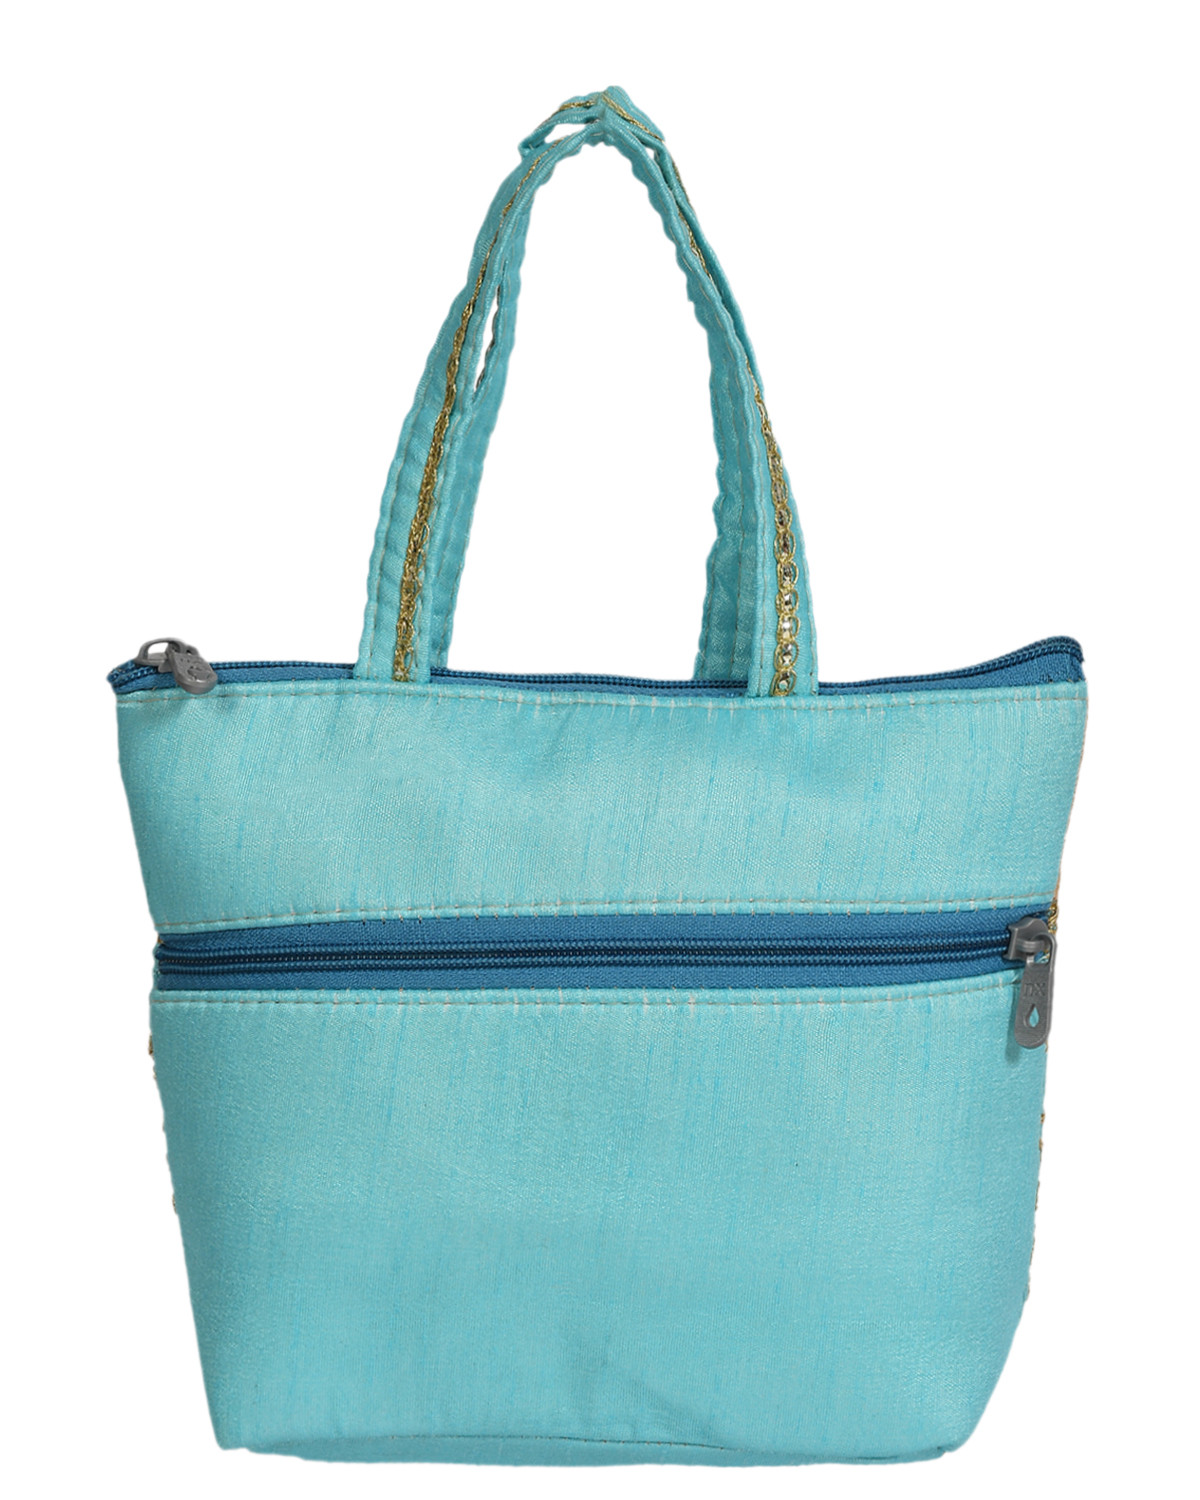 Kuber Industries Polyester Embroidery Design Hand Bag For Women/Girls With Handle (Blue) 54KM4030